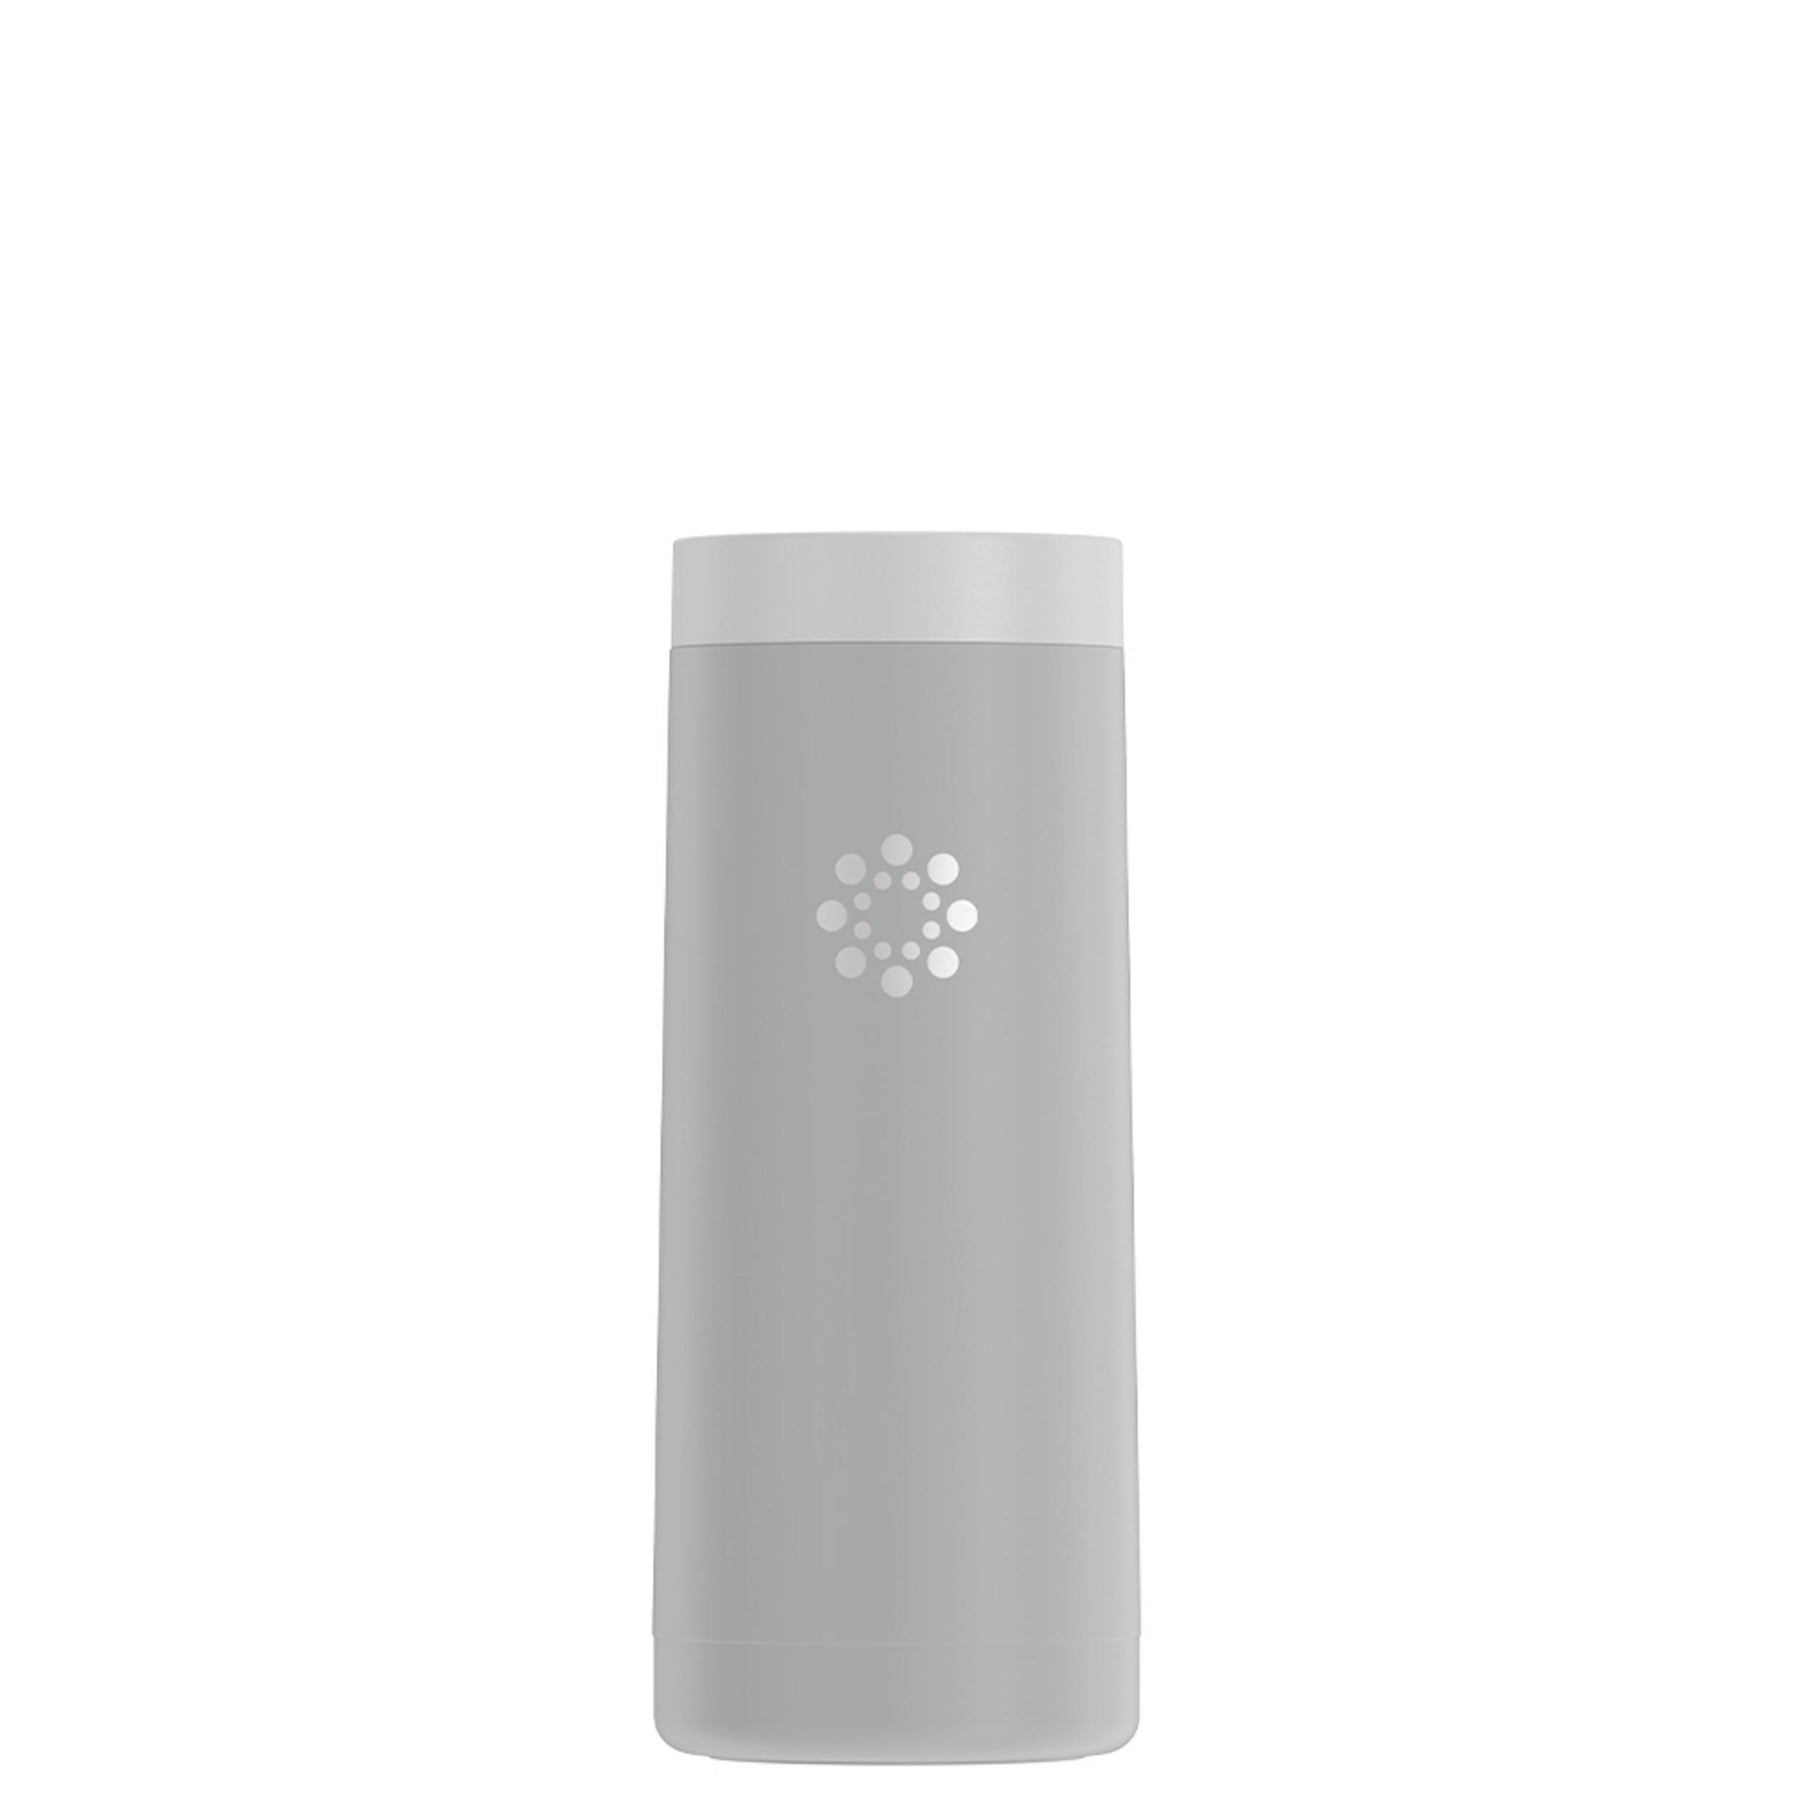 R and R Imports The University of Texas at Tyler 16 oz Insulated Stainless Steel Tumbler Colorless